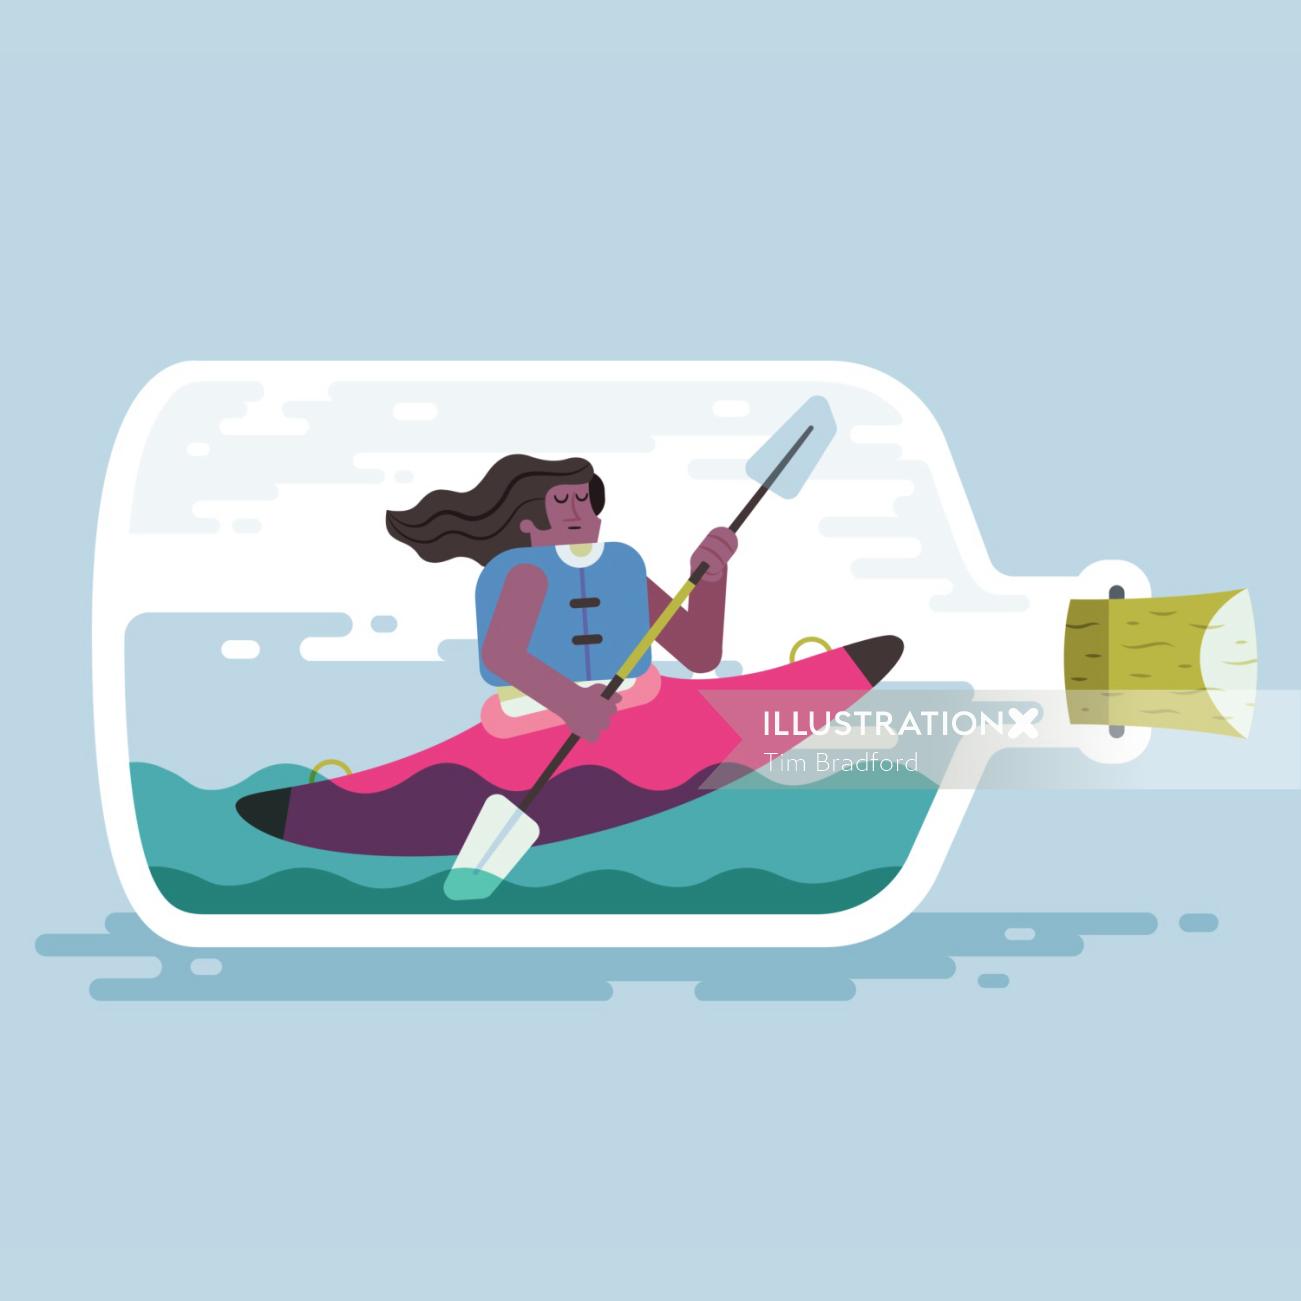 Gif animation kayaker in a bottle
